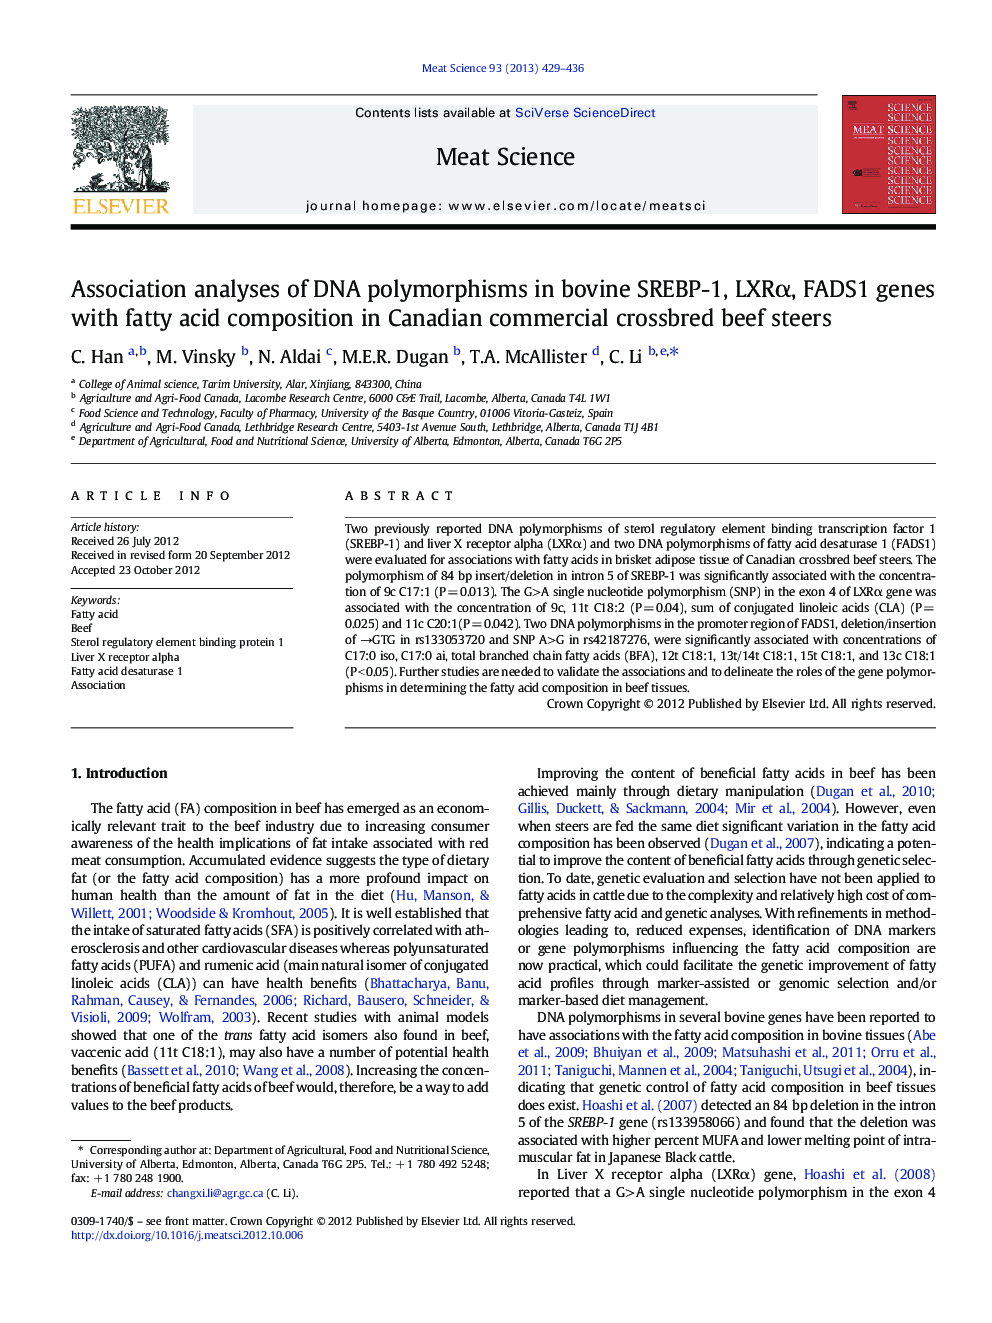 Association analyses of DNA polymorphisms in bovine SREBP-1, LXRÎ±, FADS1 genes with fatty acid composition in Canadian commercial crossbred beef steers